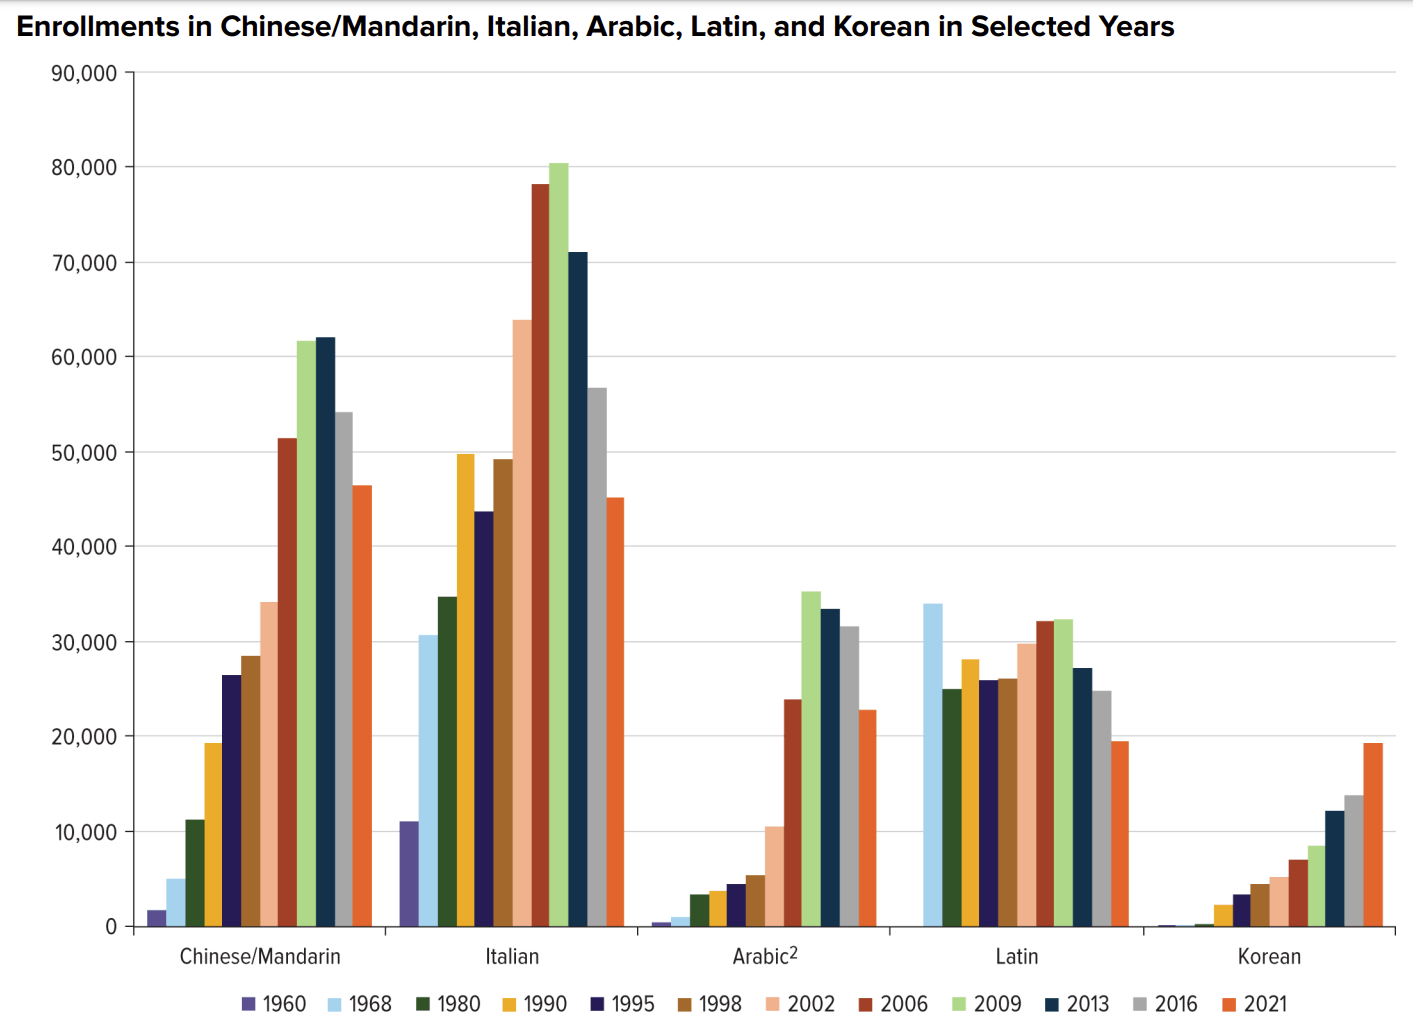 bar graph showing recent downward trends for these languages, other than Korean, which has continued to increase strongly